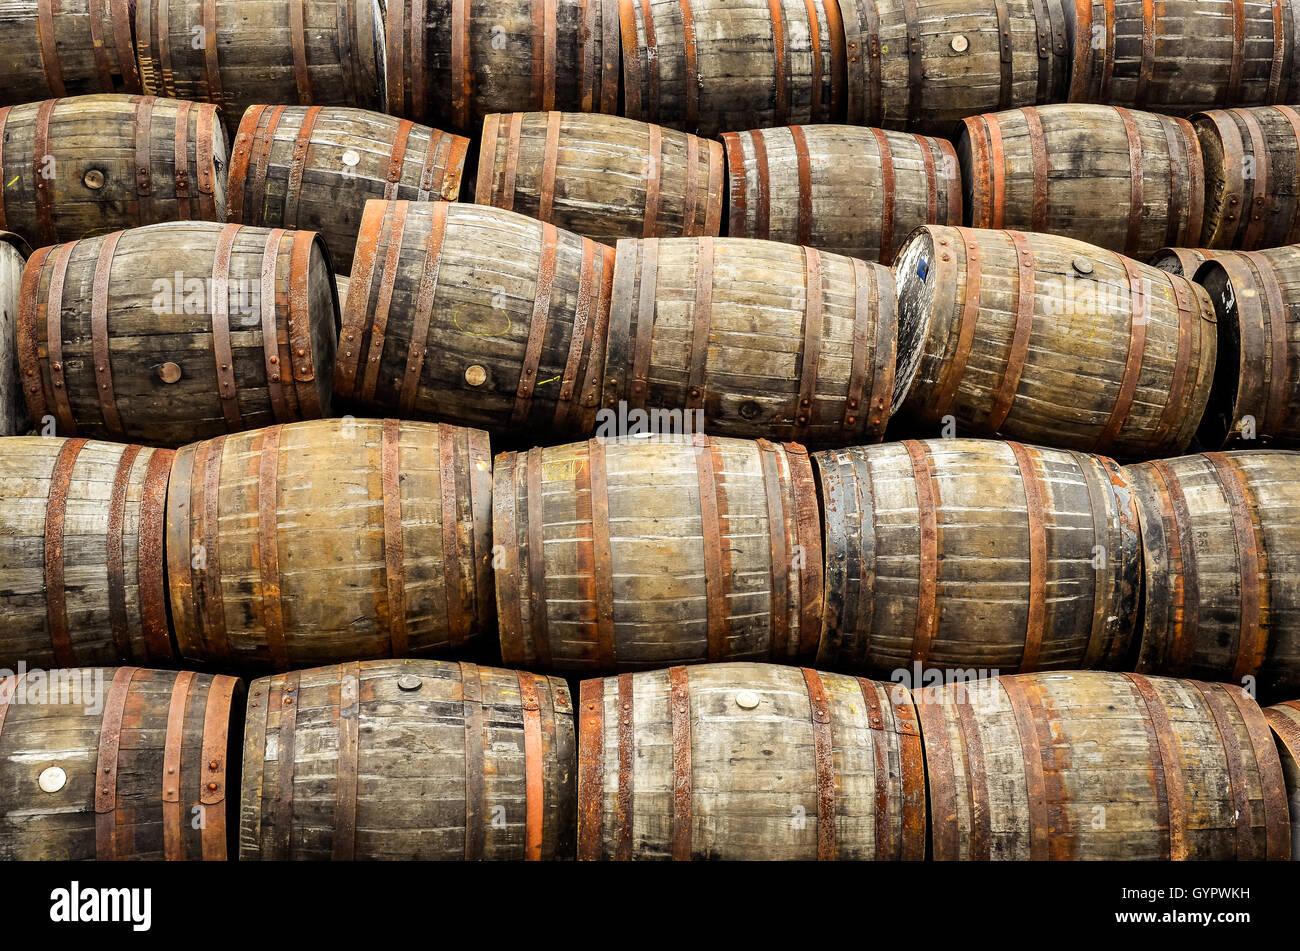 Stacked pile of old whisky and wine wooden barrels Stock Photo